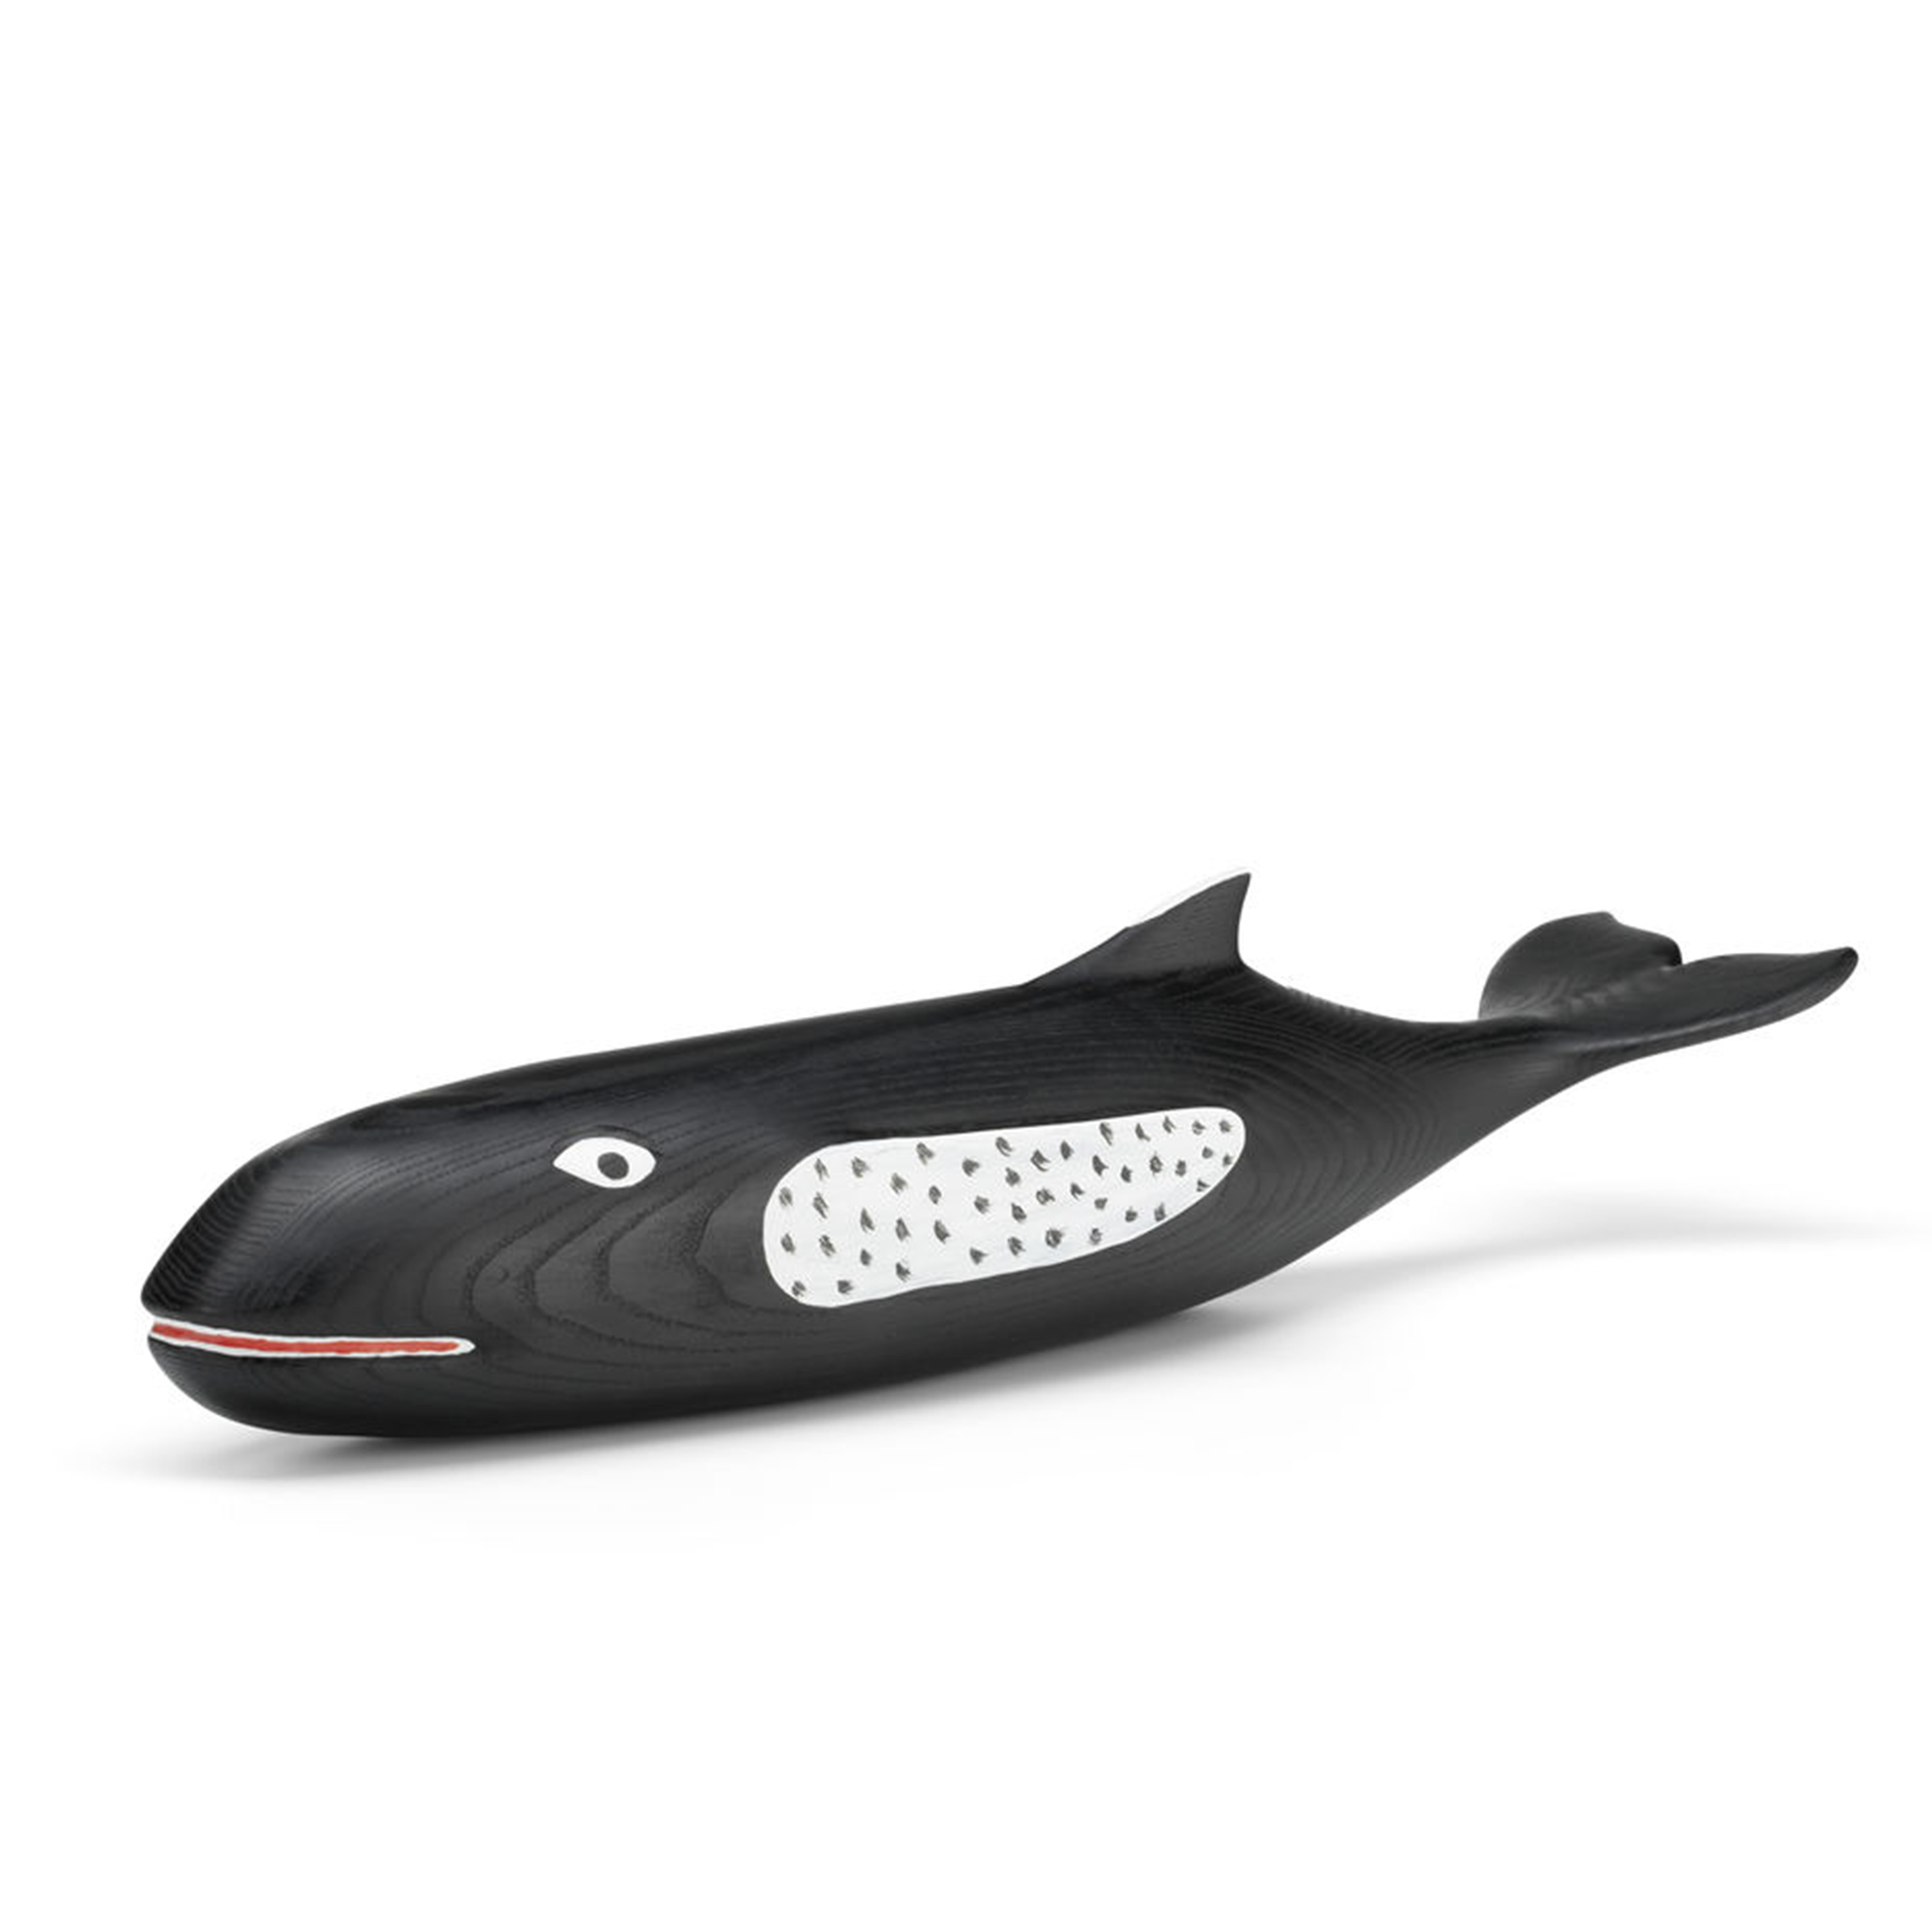 Eames House Whale by Vitra